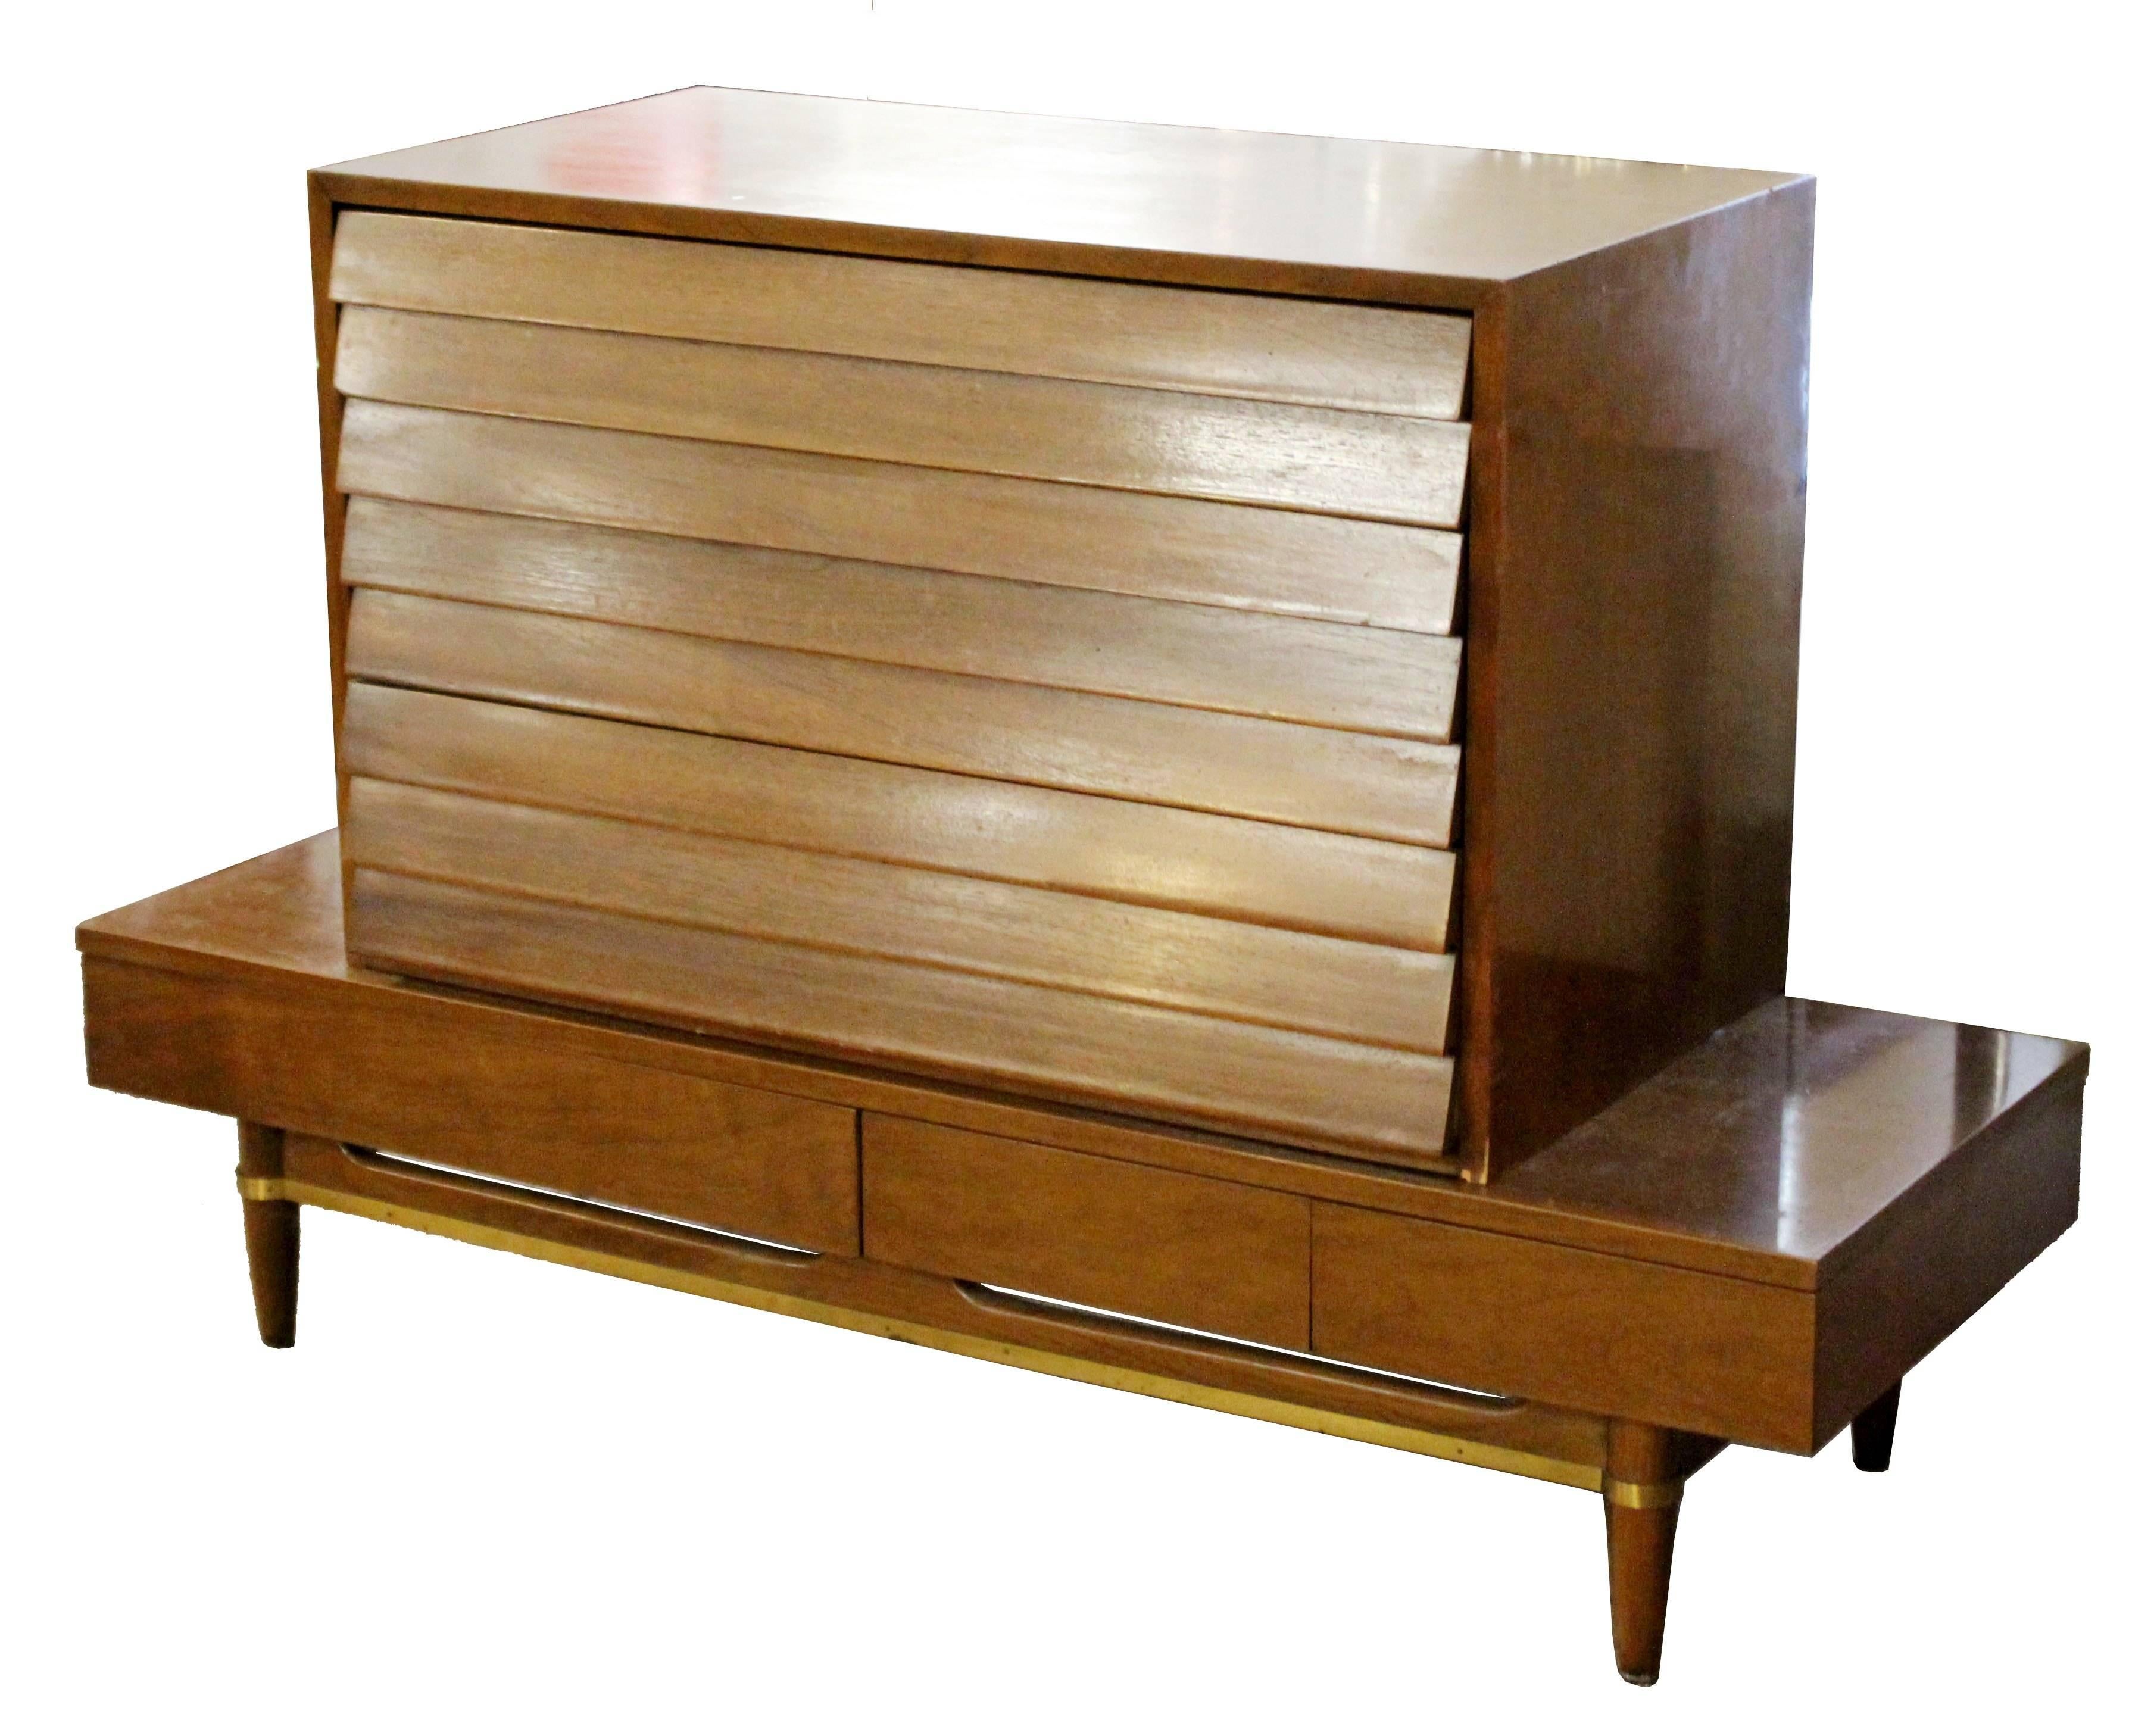 For your consideration is a gorgeous, walnut dresser, designed by Merton Gershun for American of Martinsville, circa 1970s. Top box has three louvered drawers and the bench or low console table has three drawers and brass trim. In excellent